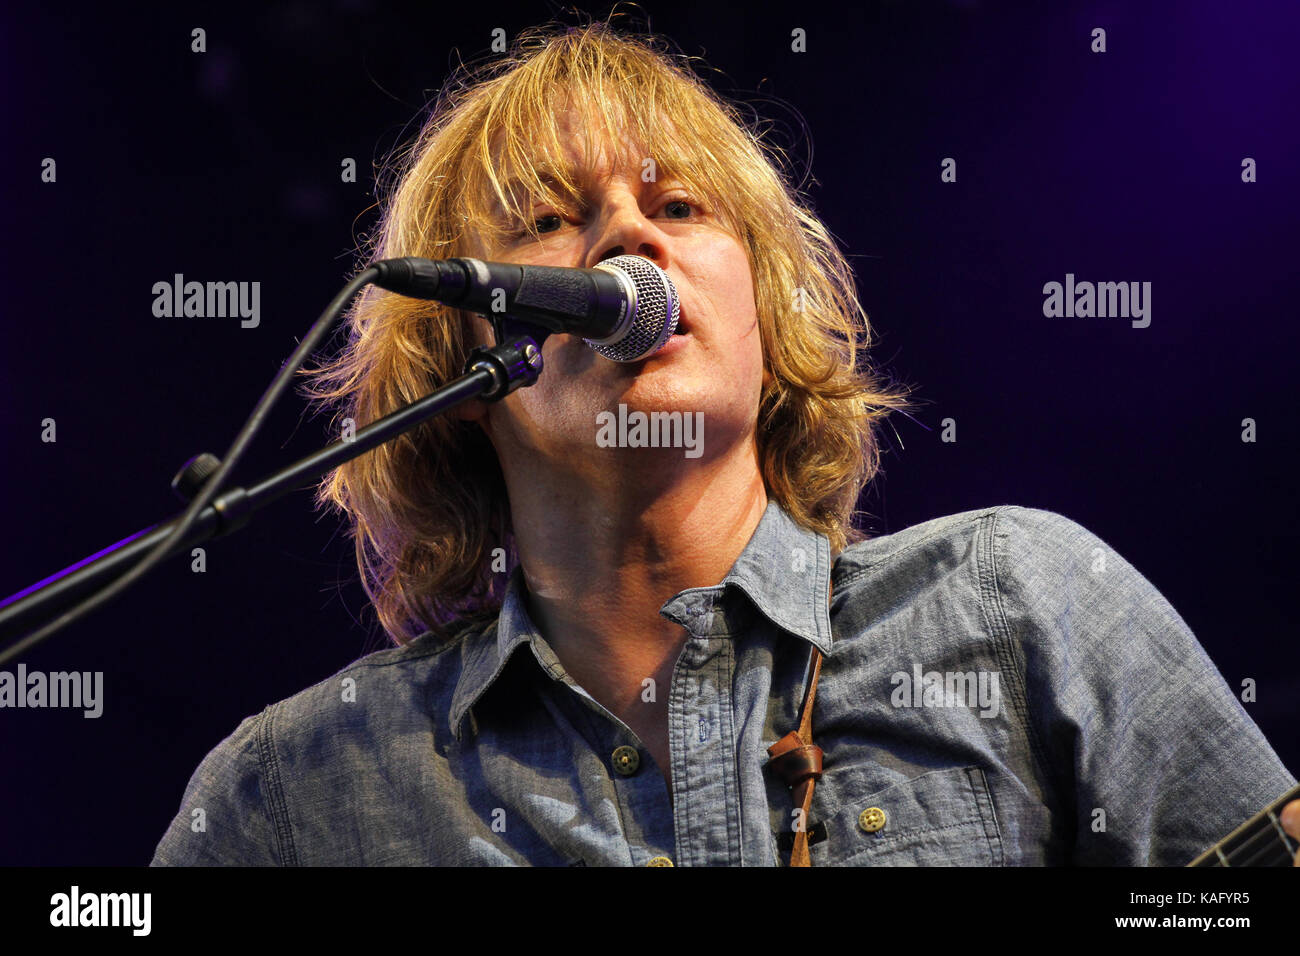 The Norwegian rock band BigBang performs a live concert at the Norwegian music festival Hovefestivalen 2012. Here band frontman, singer and musician Øystein Greni is pictured live on stage. Norway, 29/06 2012. Stock Photo